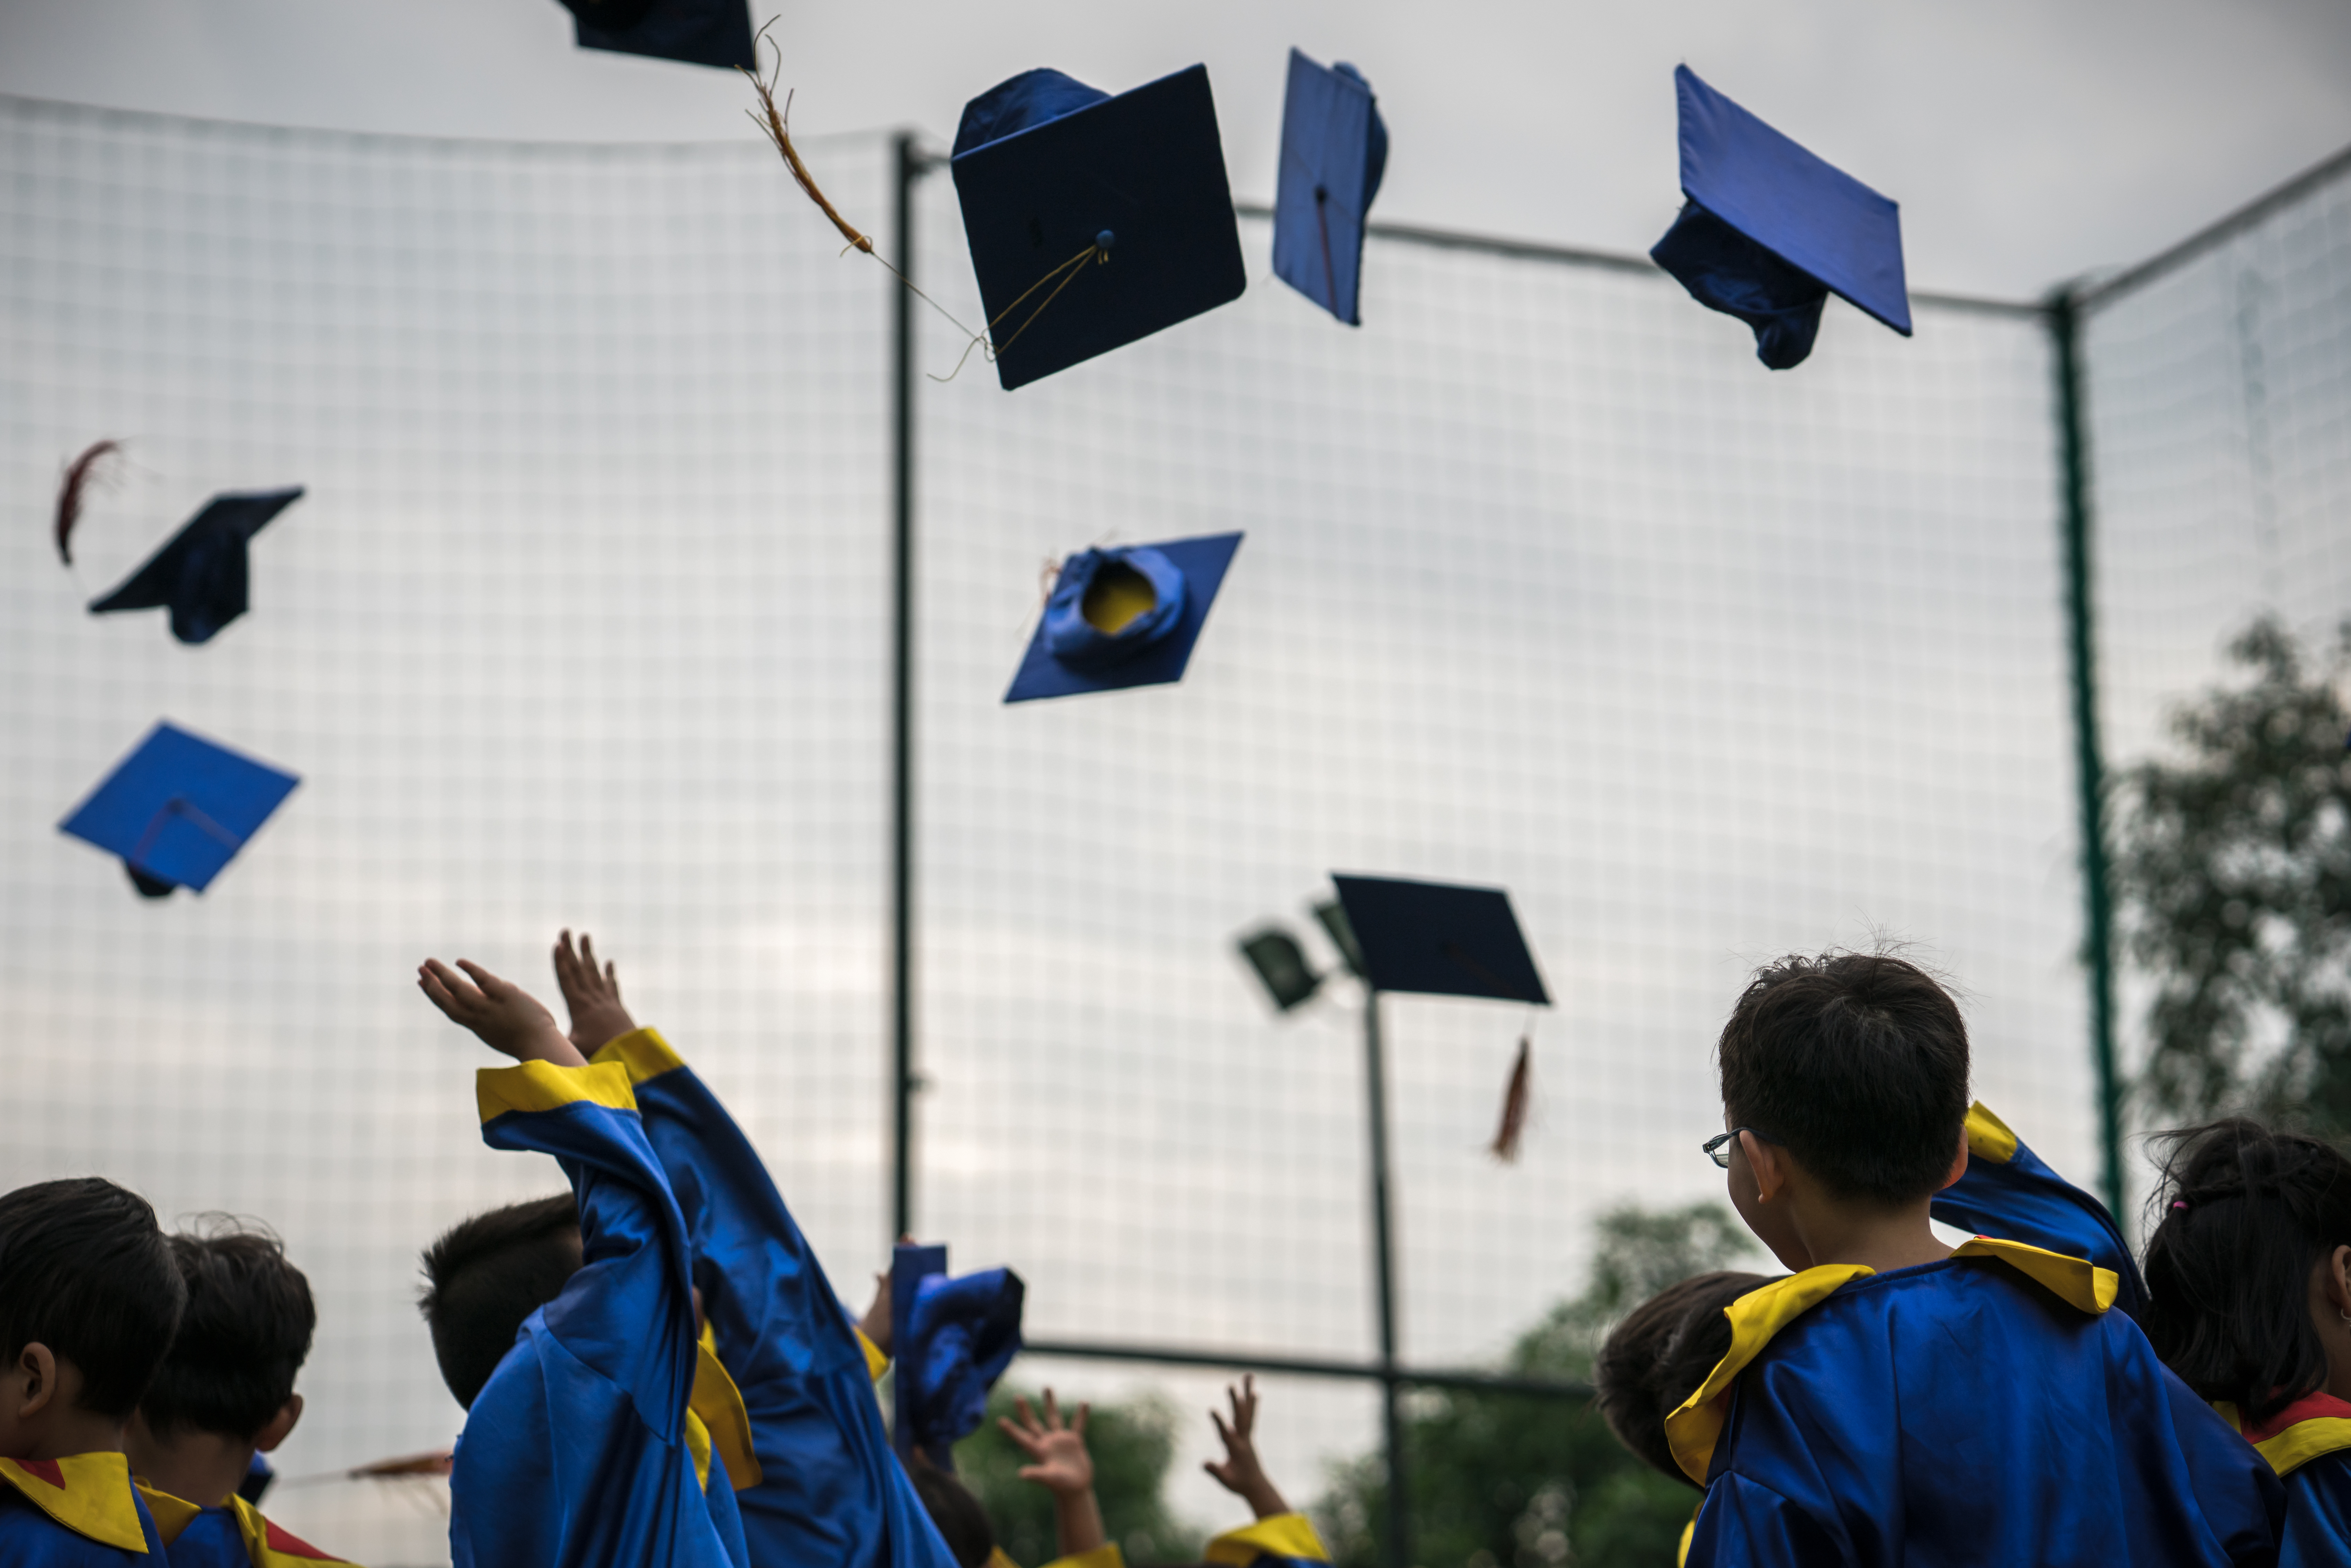 Image of children throwing graduation caps in the air